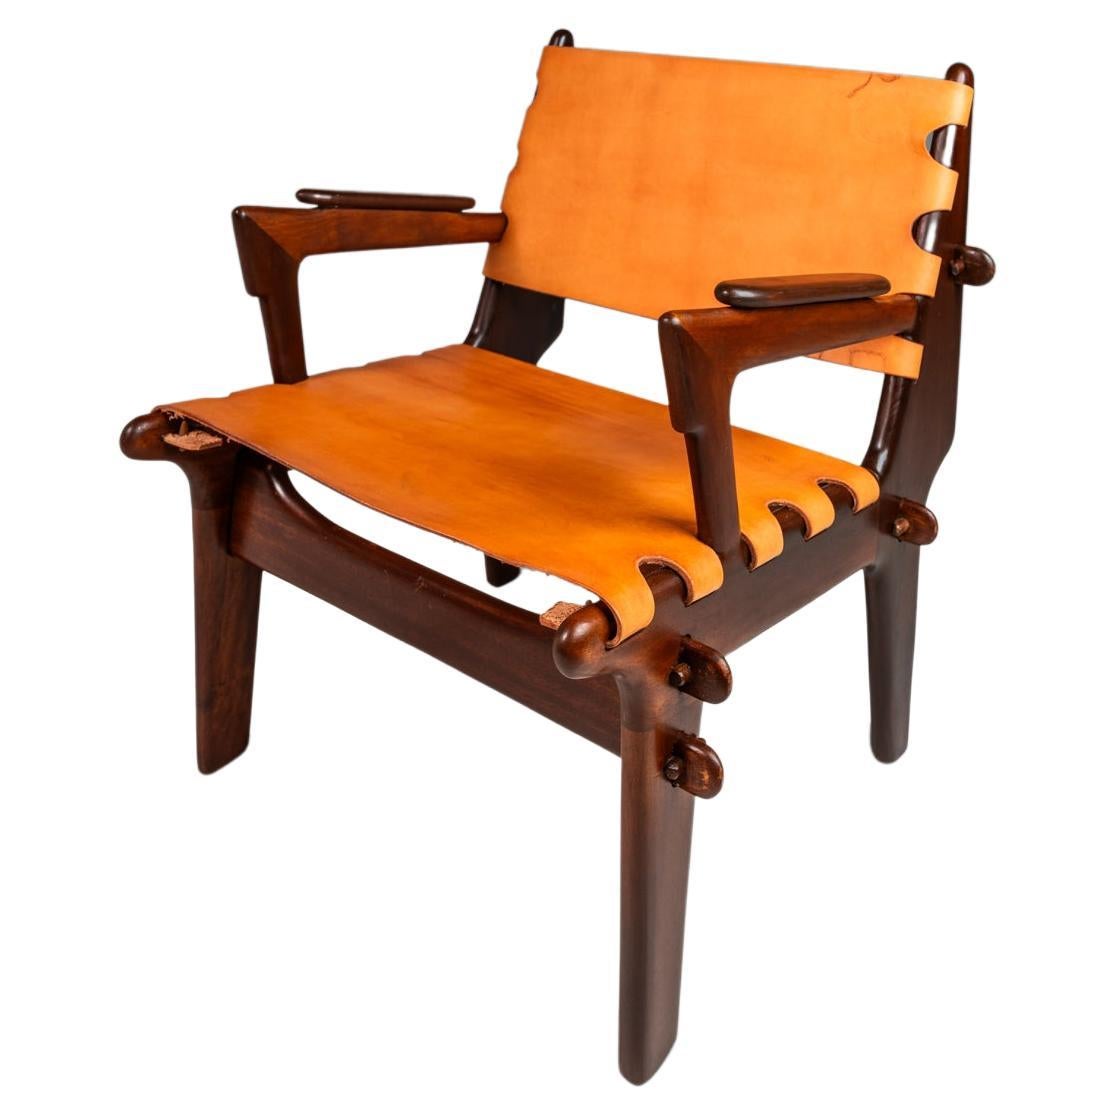 Tooled Leather Sling Safari / Lounge Chair by Angel Pazmino, Ecuador, c. 1960s  For Sale